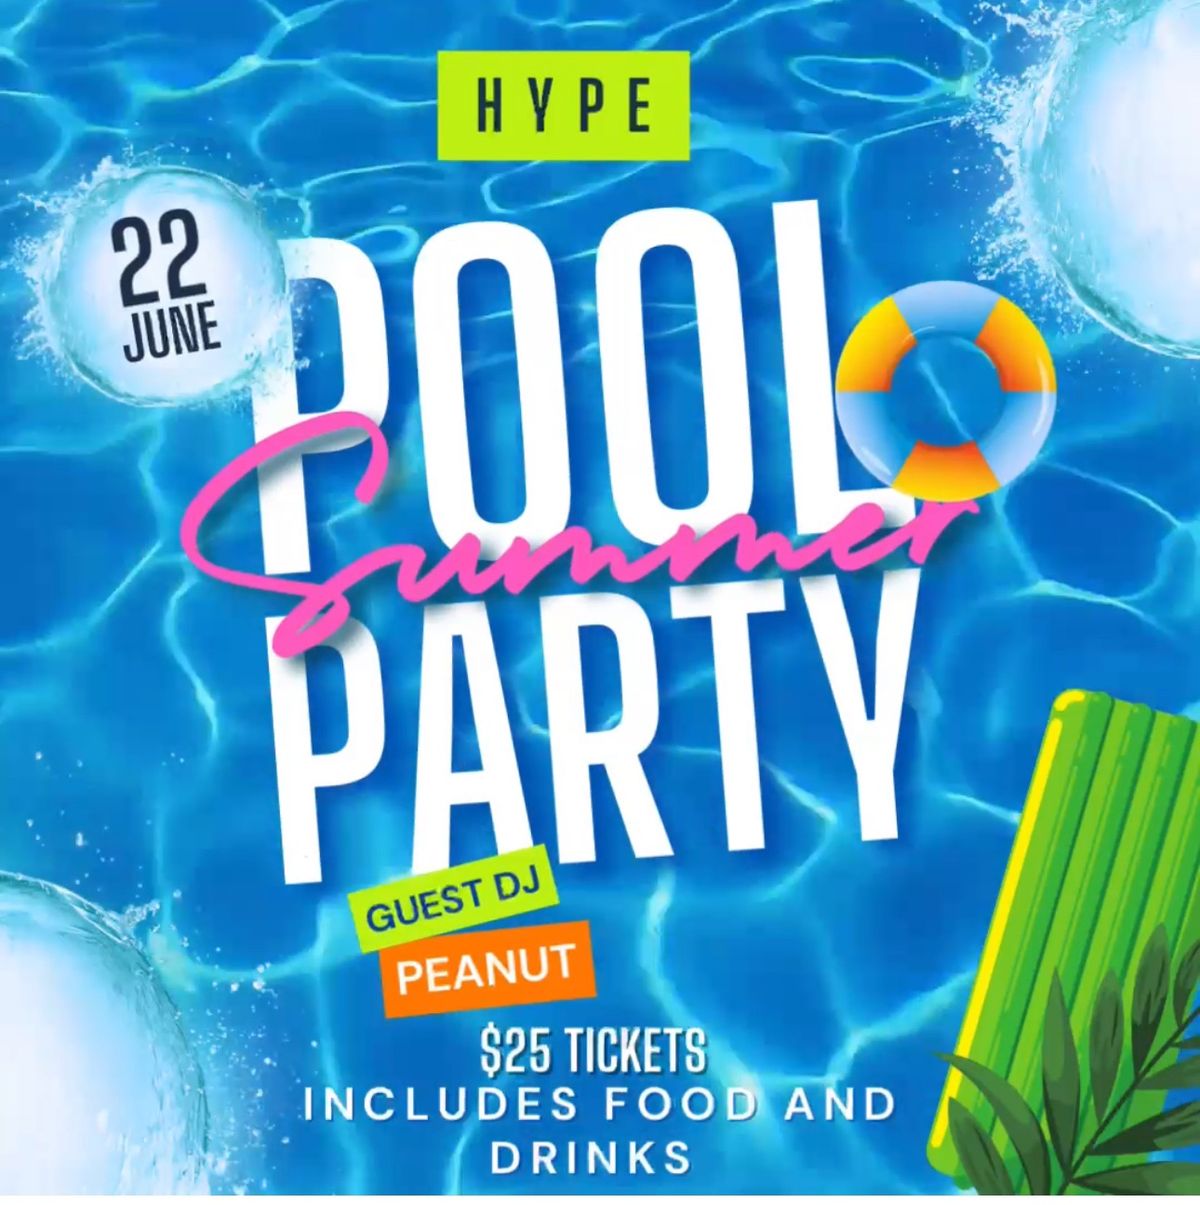 Hype pool party